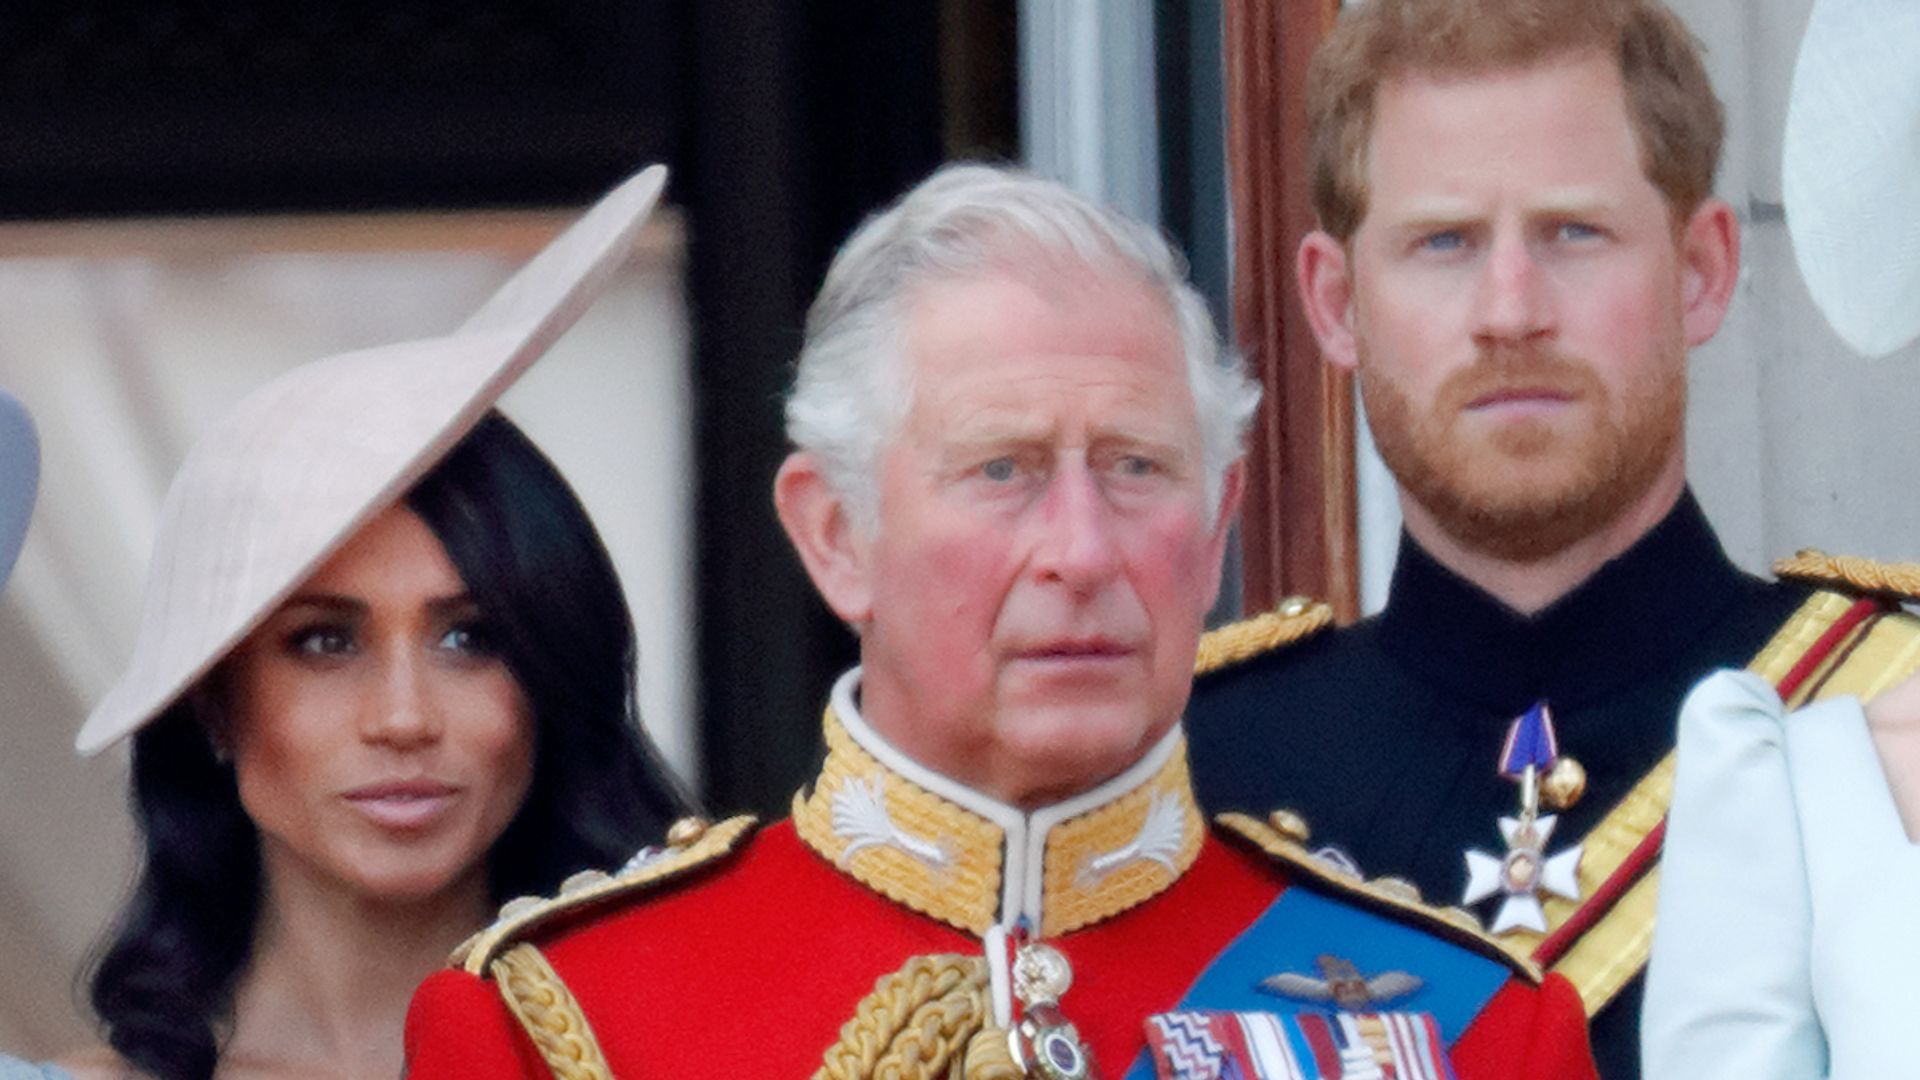 Meghan Markle, King Charles and Prince Harry on the balcony of Buckingham Palace during Trooping The Colour 2018 